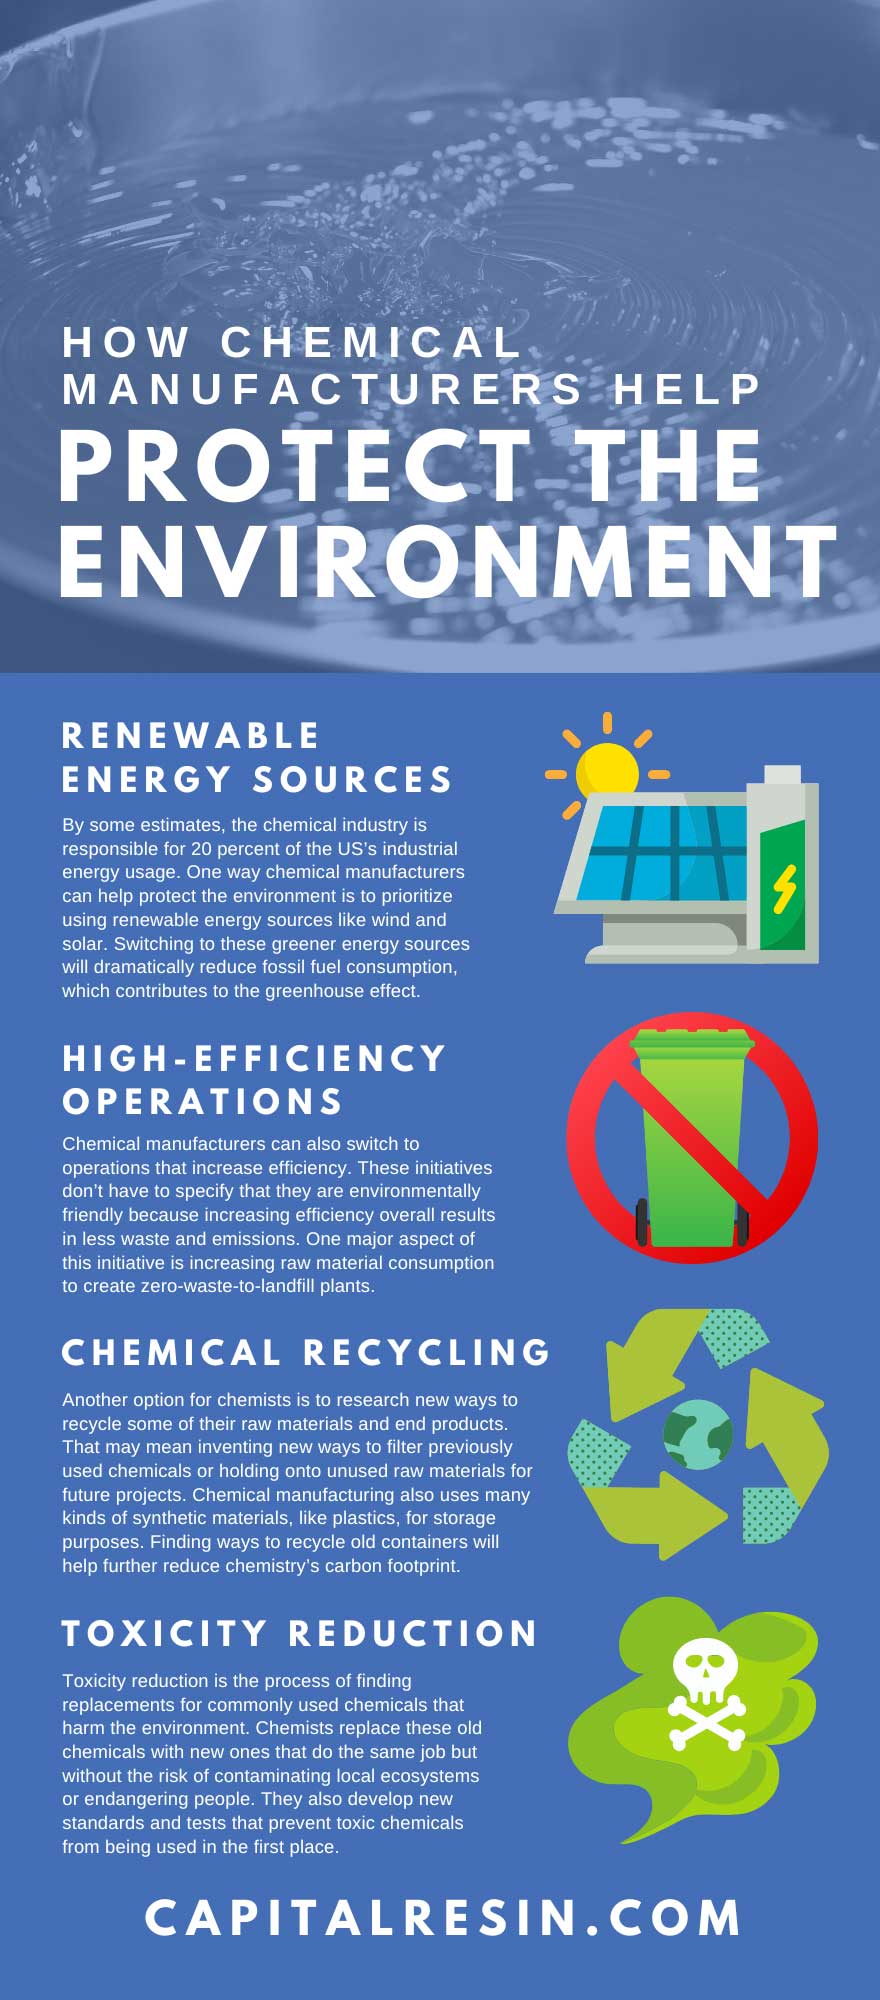 How Chemical Manufacturers Help Protect the Environment